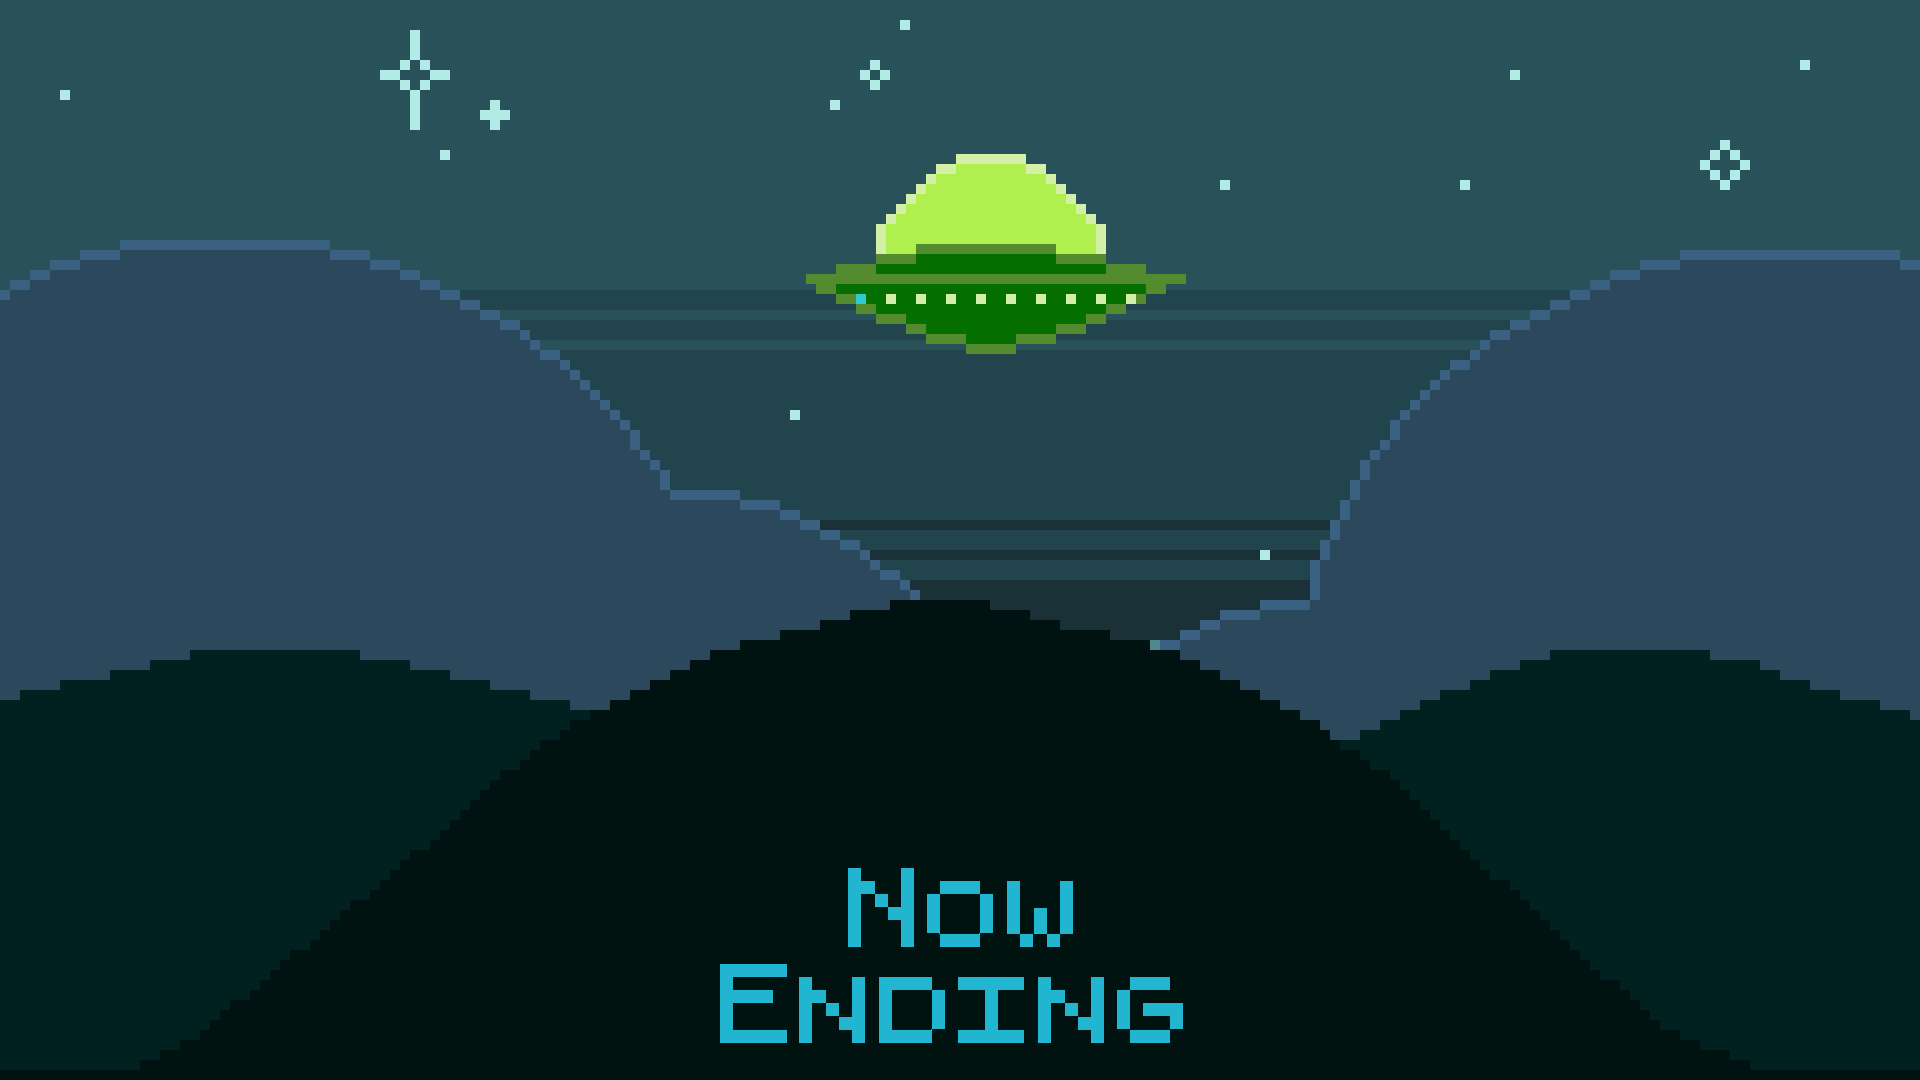 Alien Themed Pixel Twitch Screens [ANIMATED] by skullstho